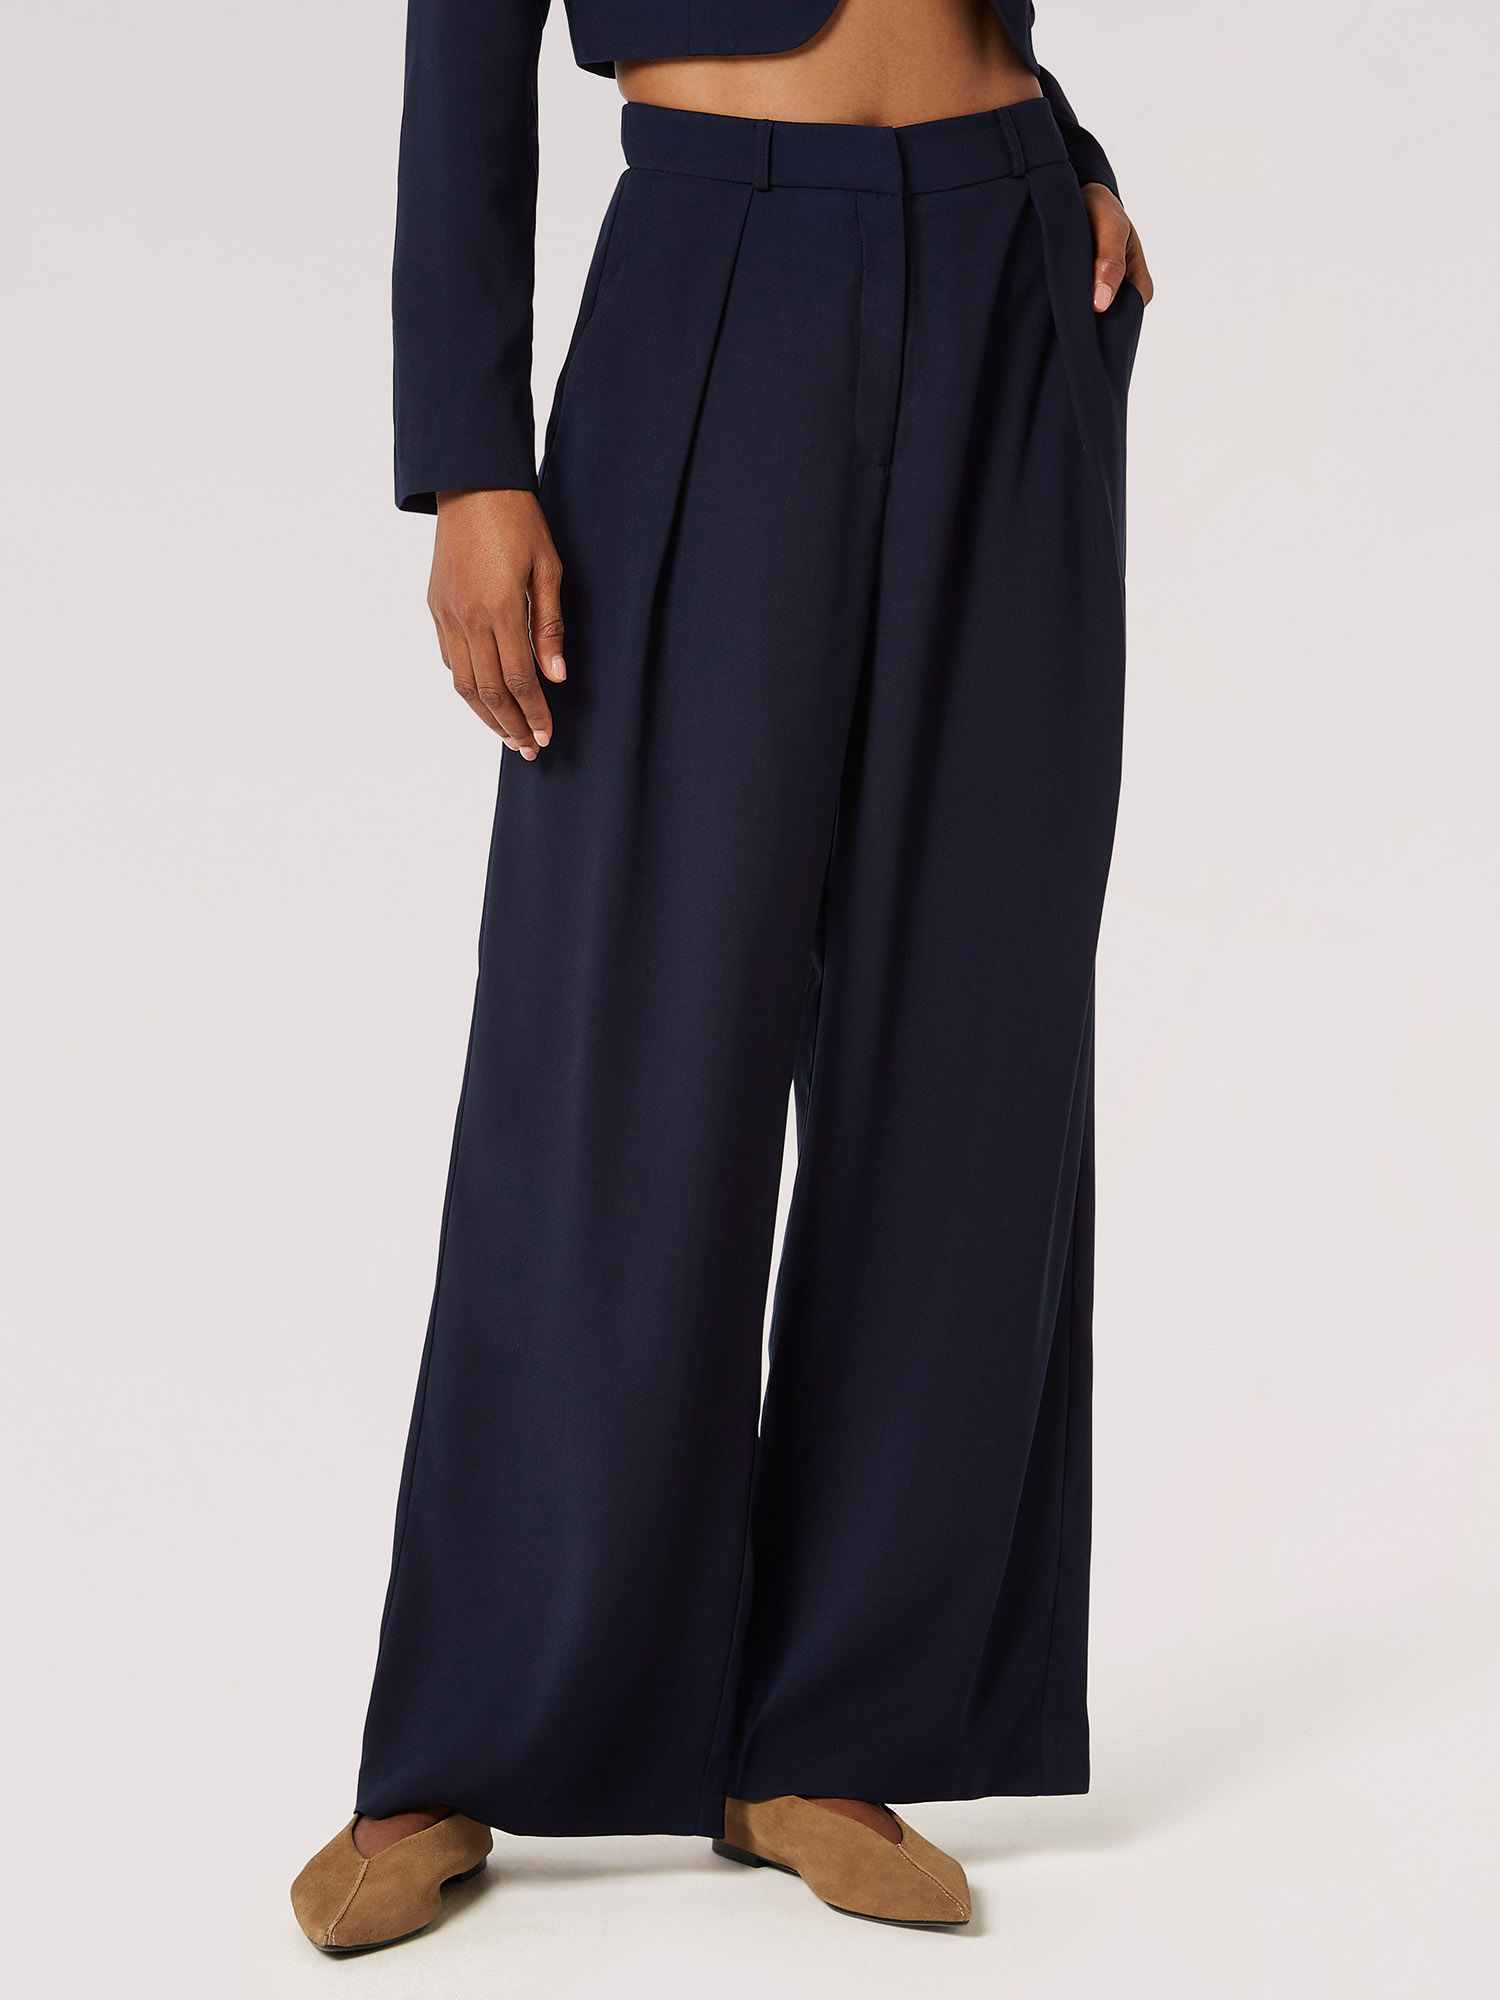 Pleat Detail Soft Tailored Trousers | Apricot Clothing